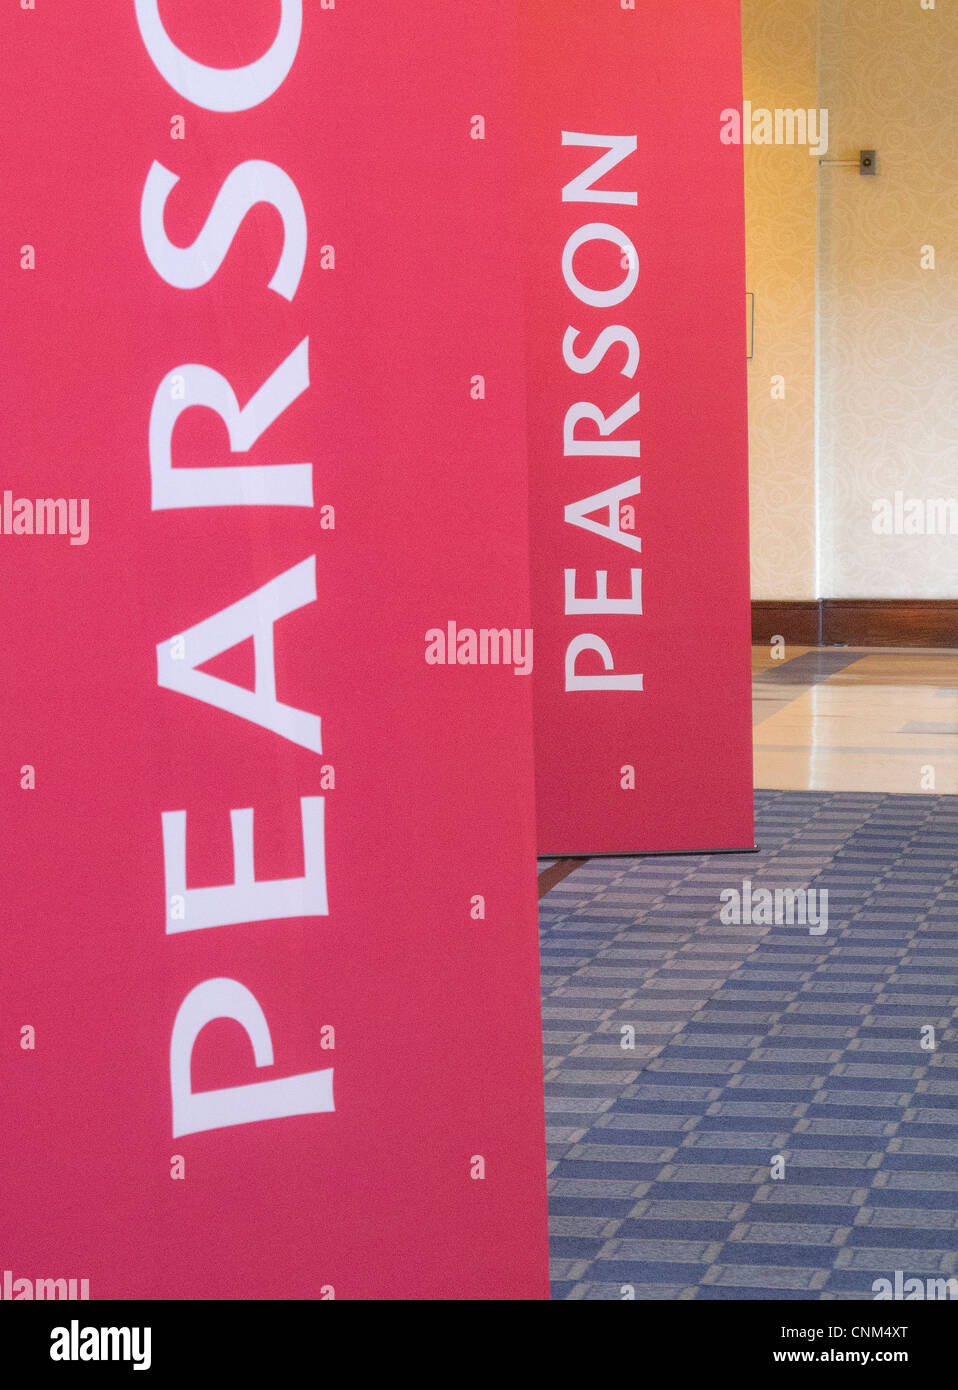 Pearson signs at a business conference Stock Photo Alamy